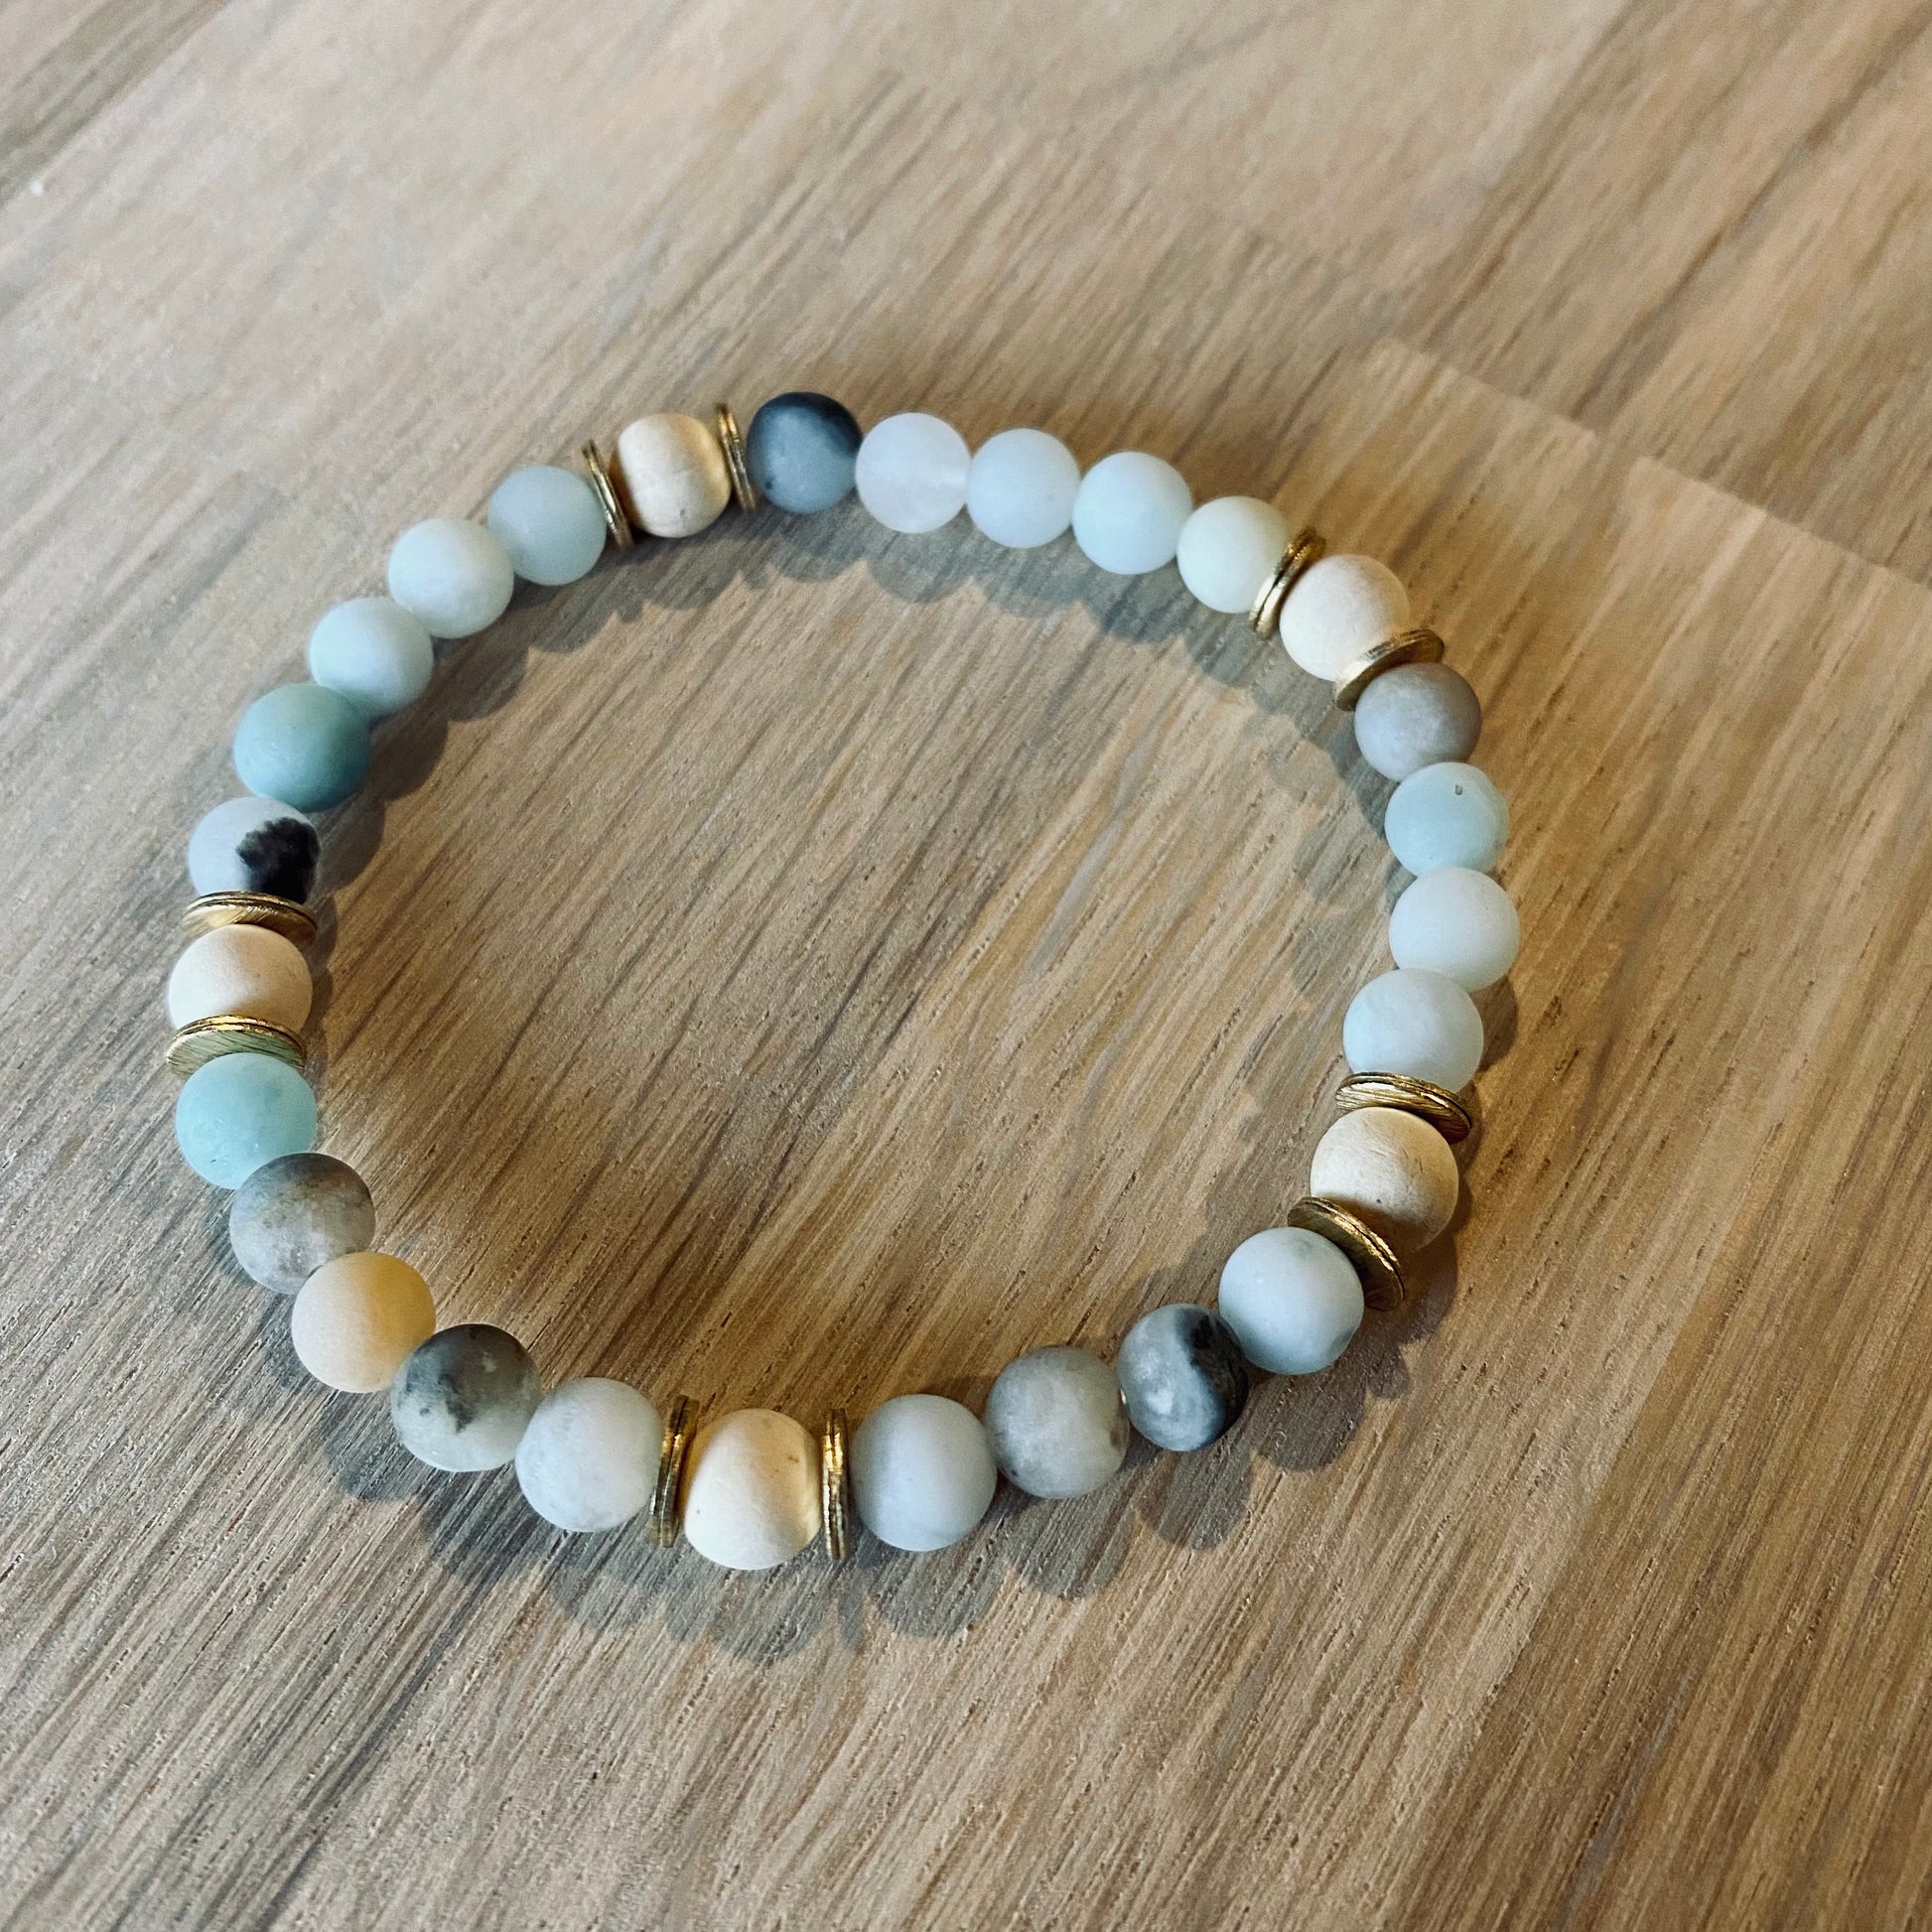 Amazonite aroma bracelet/diffuser bracelet made from 6mm amazonite & natural white wood beads with brass heishi disc embellishments. Laid flat on wood grain surface. 